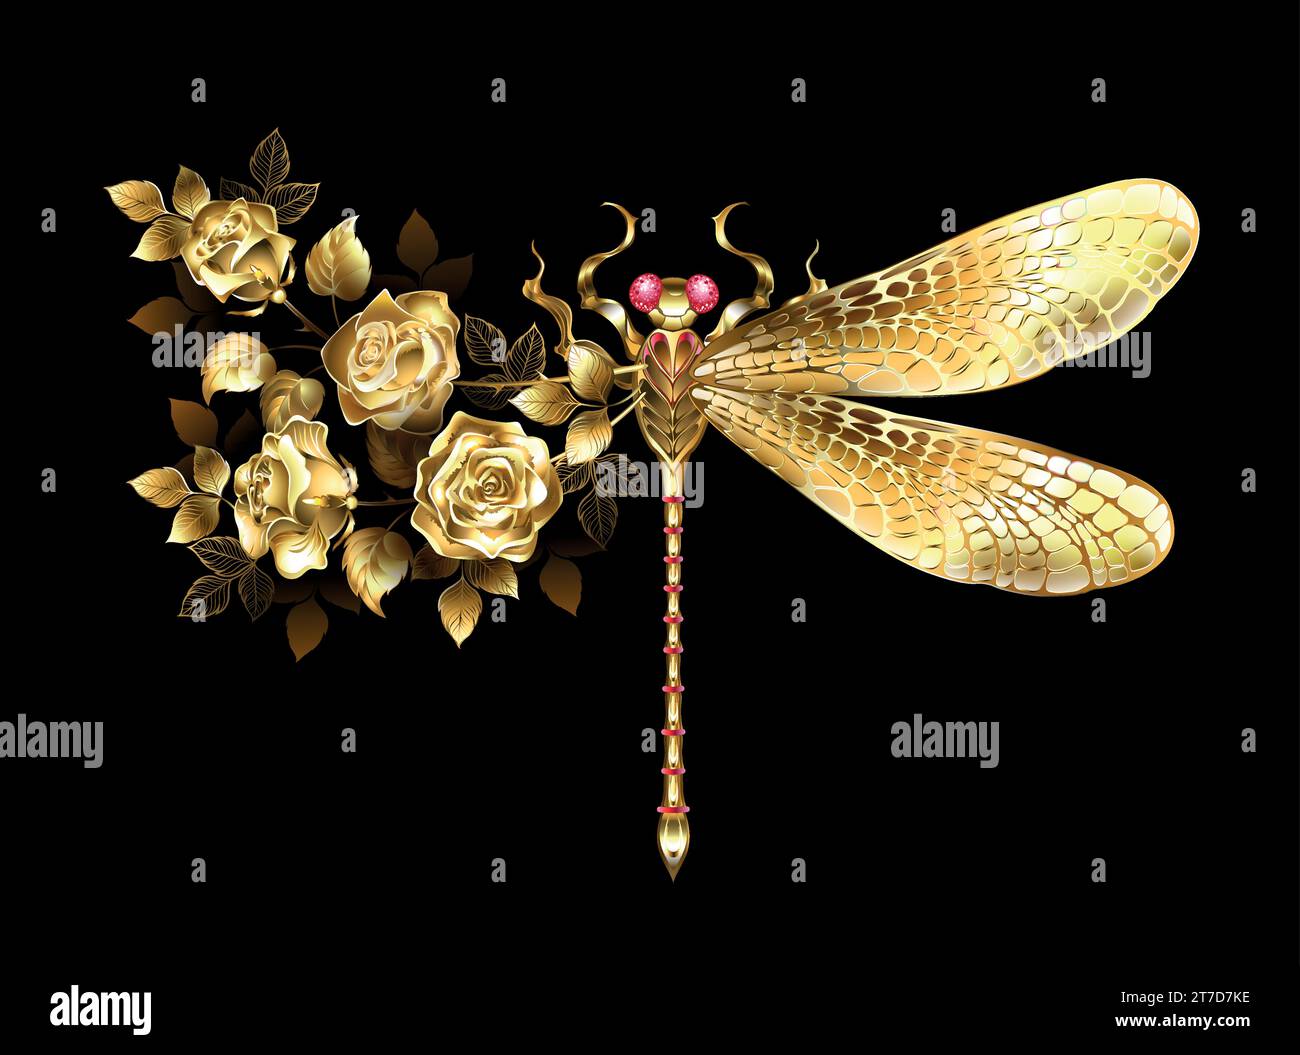 Gold, floral, artistically drawn sparkling, asymmetrical dragonfly with shiny, jeweled wings and gold, blooming roses with gold on black background. G Stock Vector